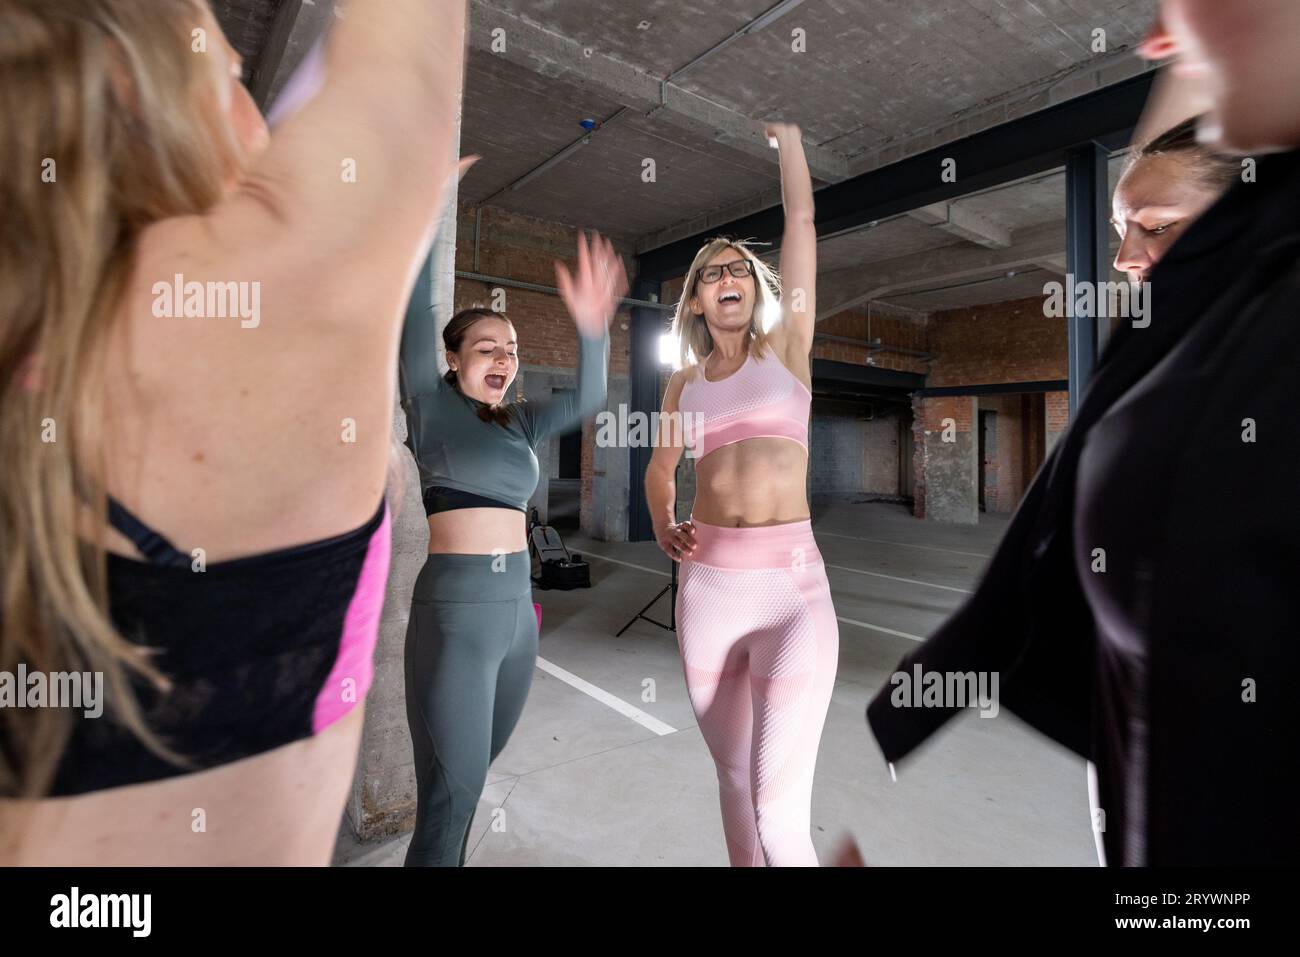 Group of Young Women Cheering After Workout in Sports Attire Stock Photo